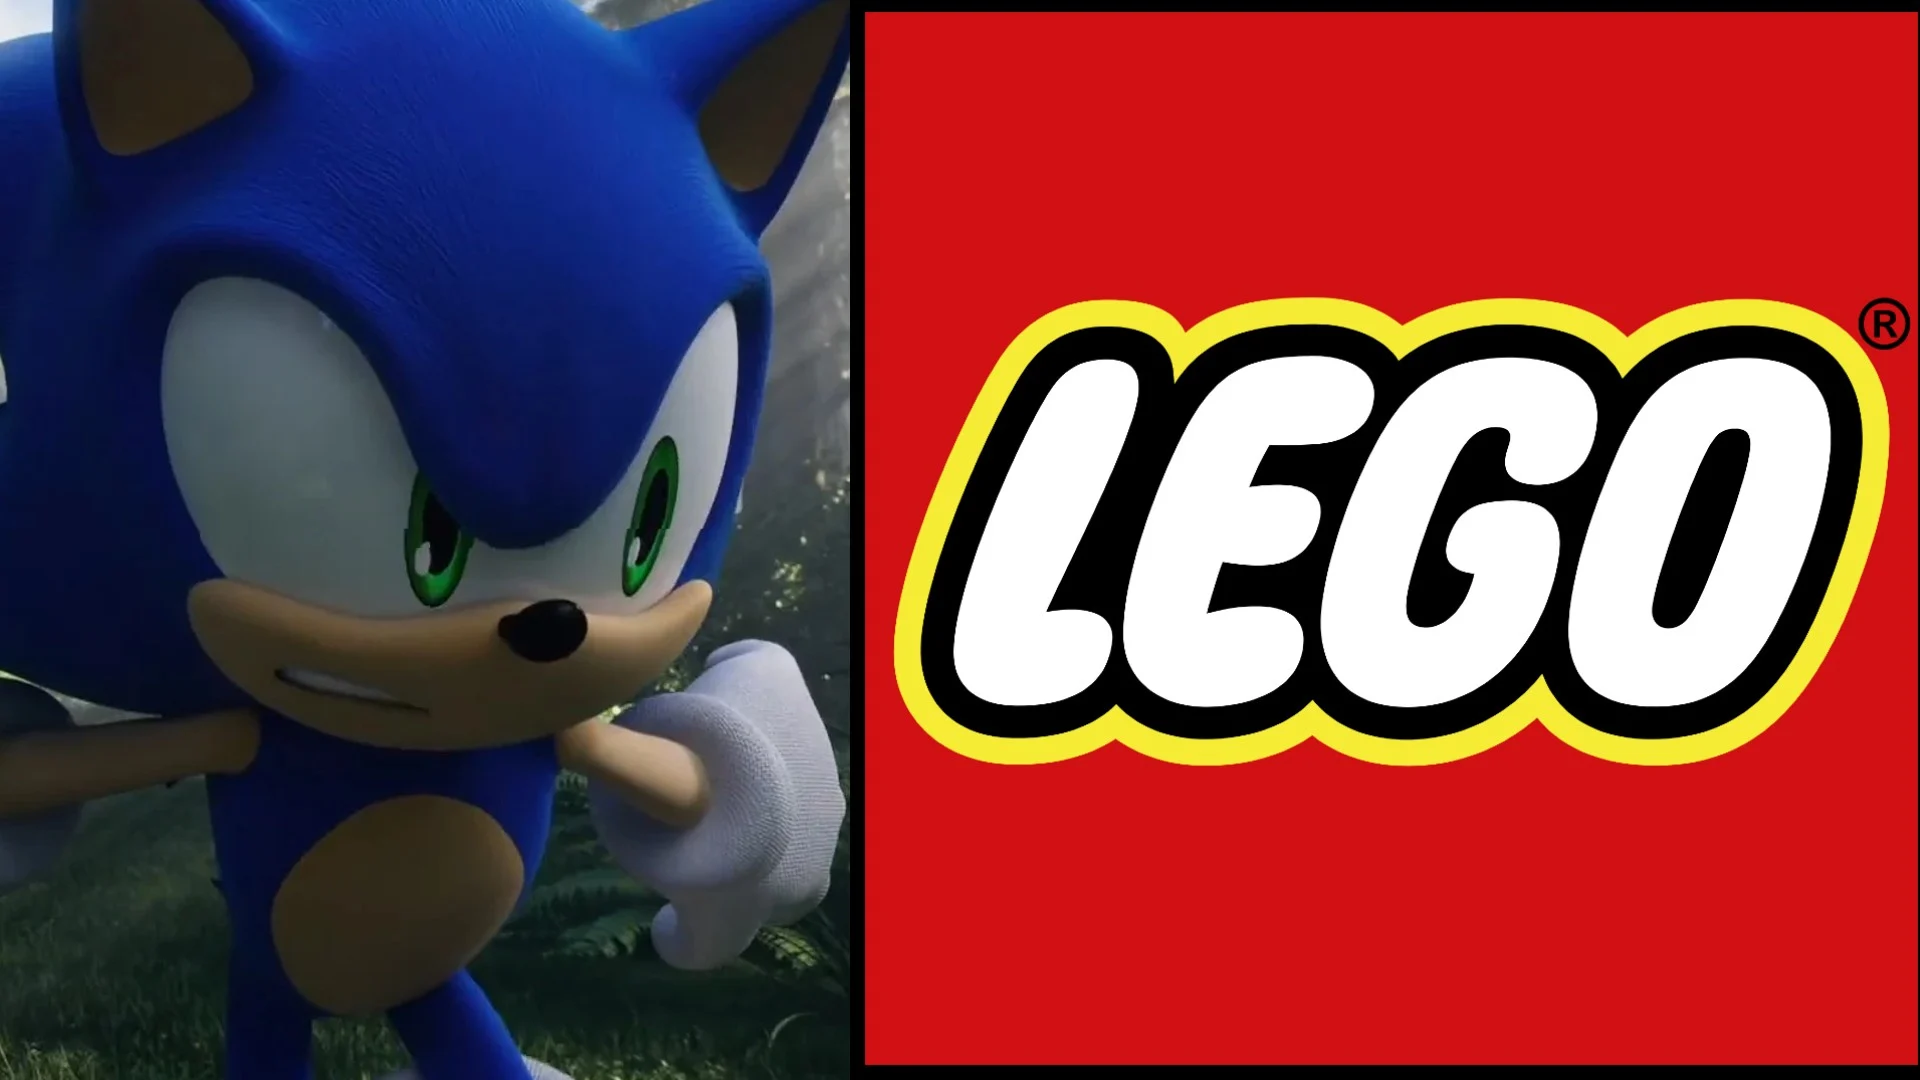 Lego Reveals New Sonic the Hedgehog Sets for Summer 2023